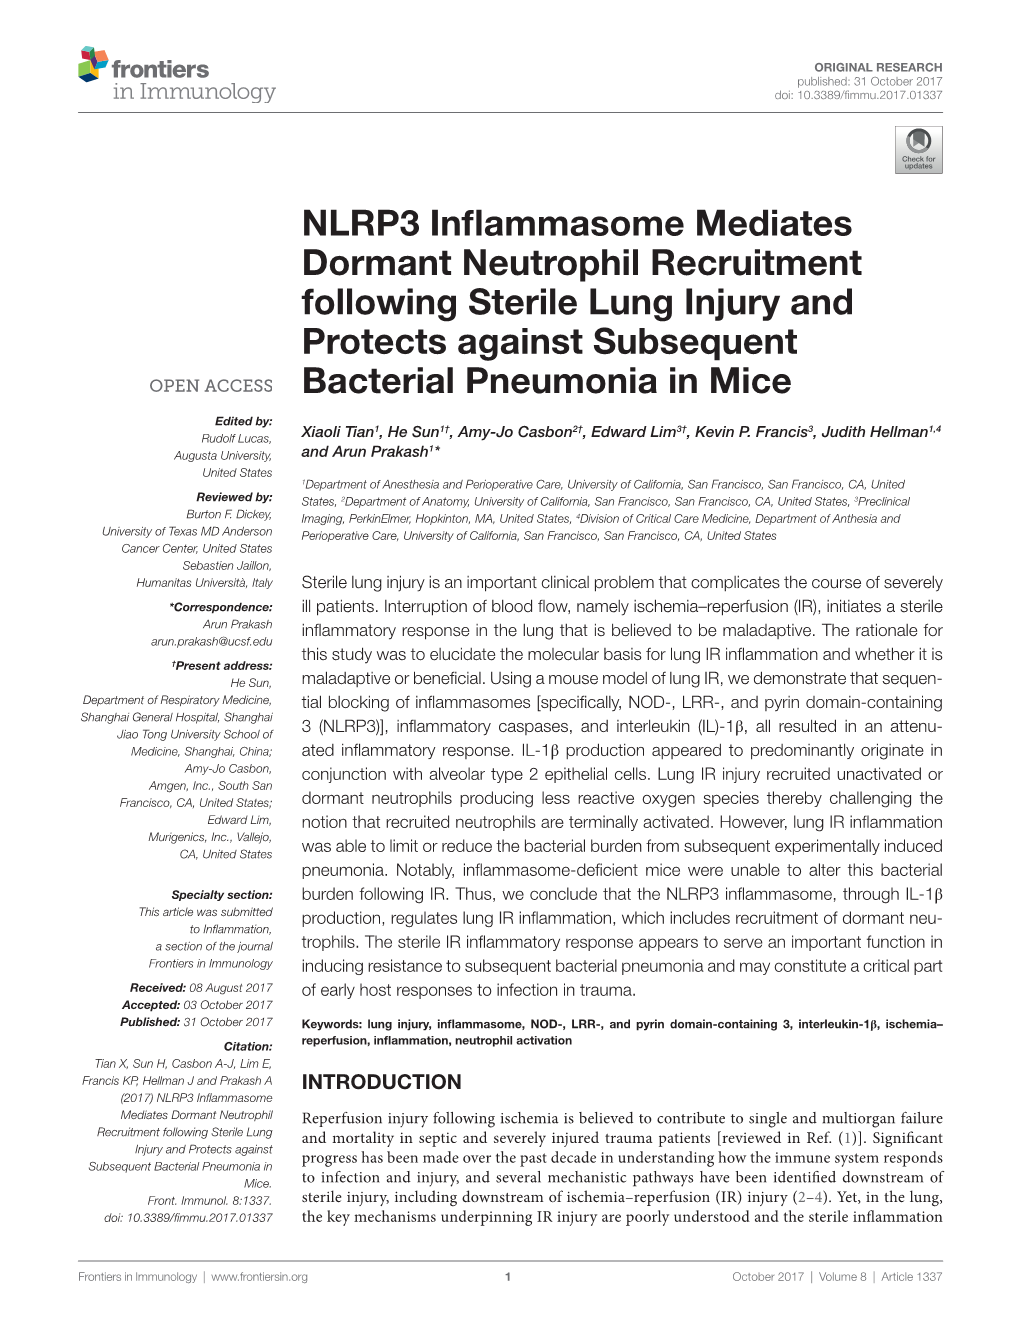 Nlrp3 Inflammasome Mediates Dormant Neutrophil Recruitment Following Sterile Lung Injury and Protects Against Subsequent Bacterial Pneumonia in Mice